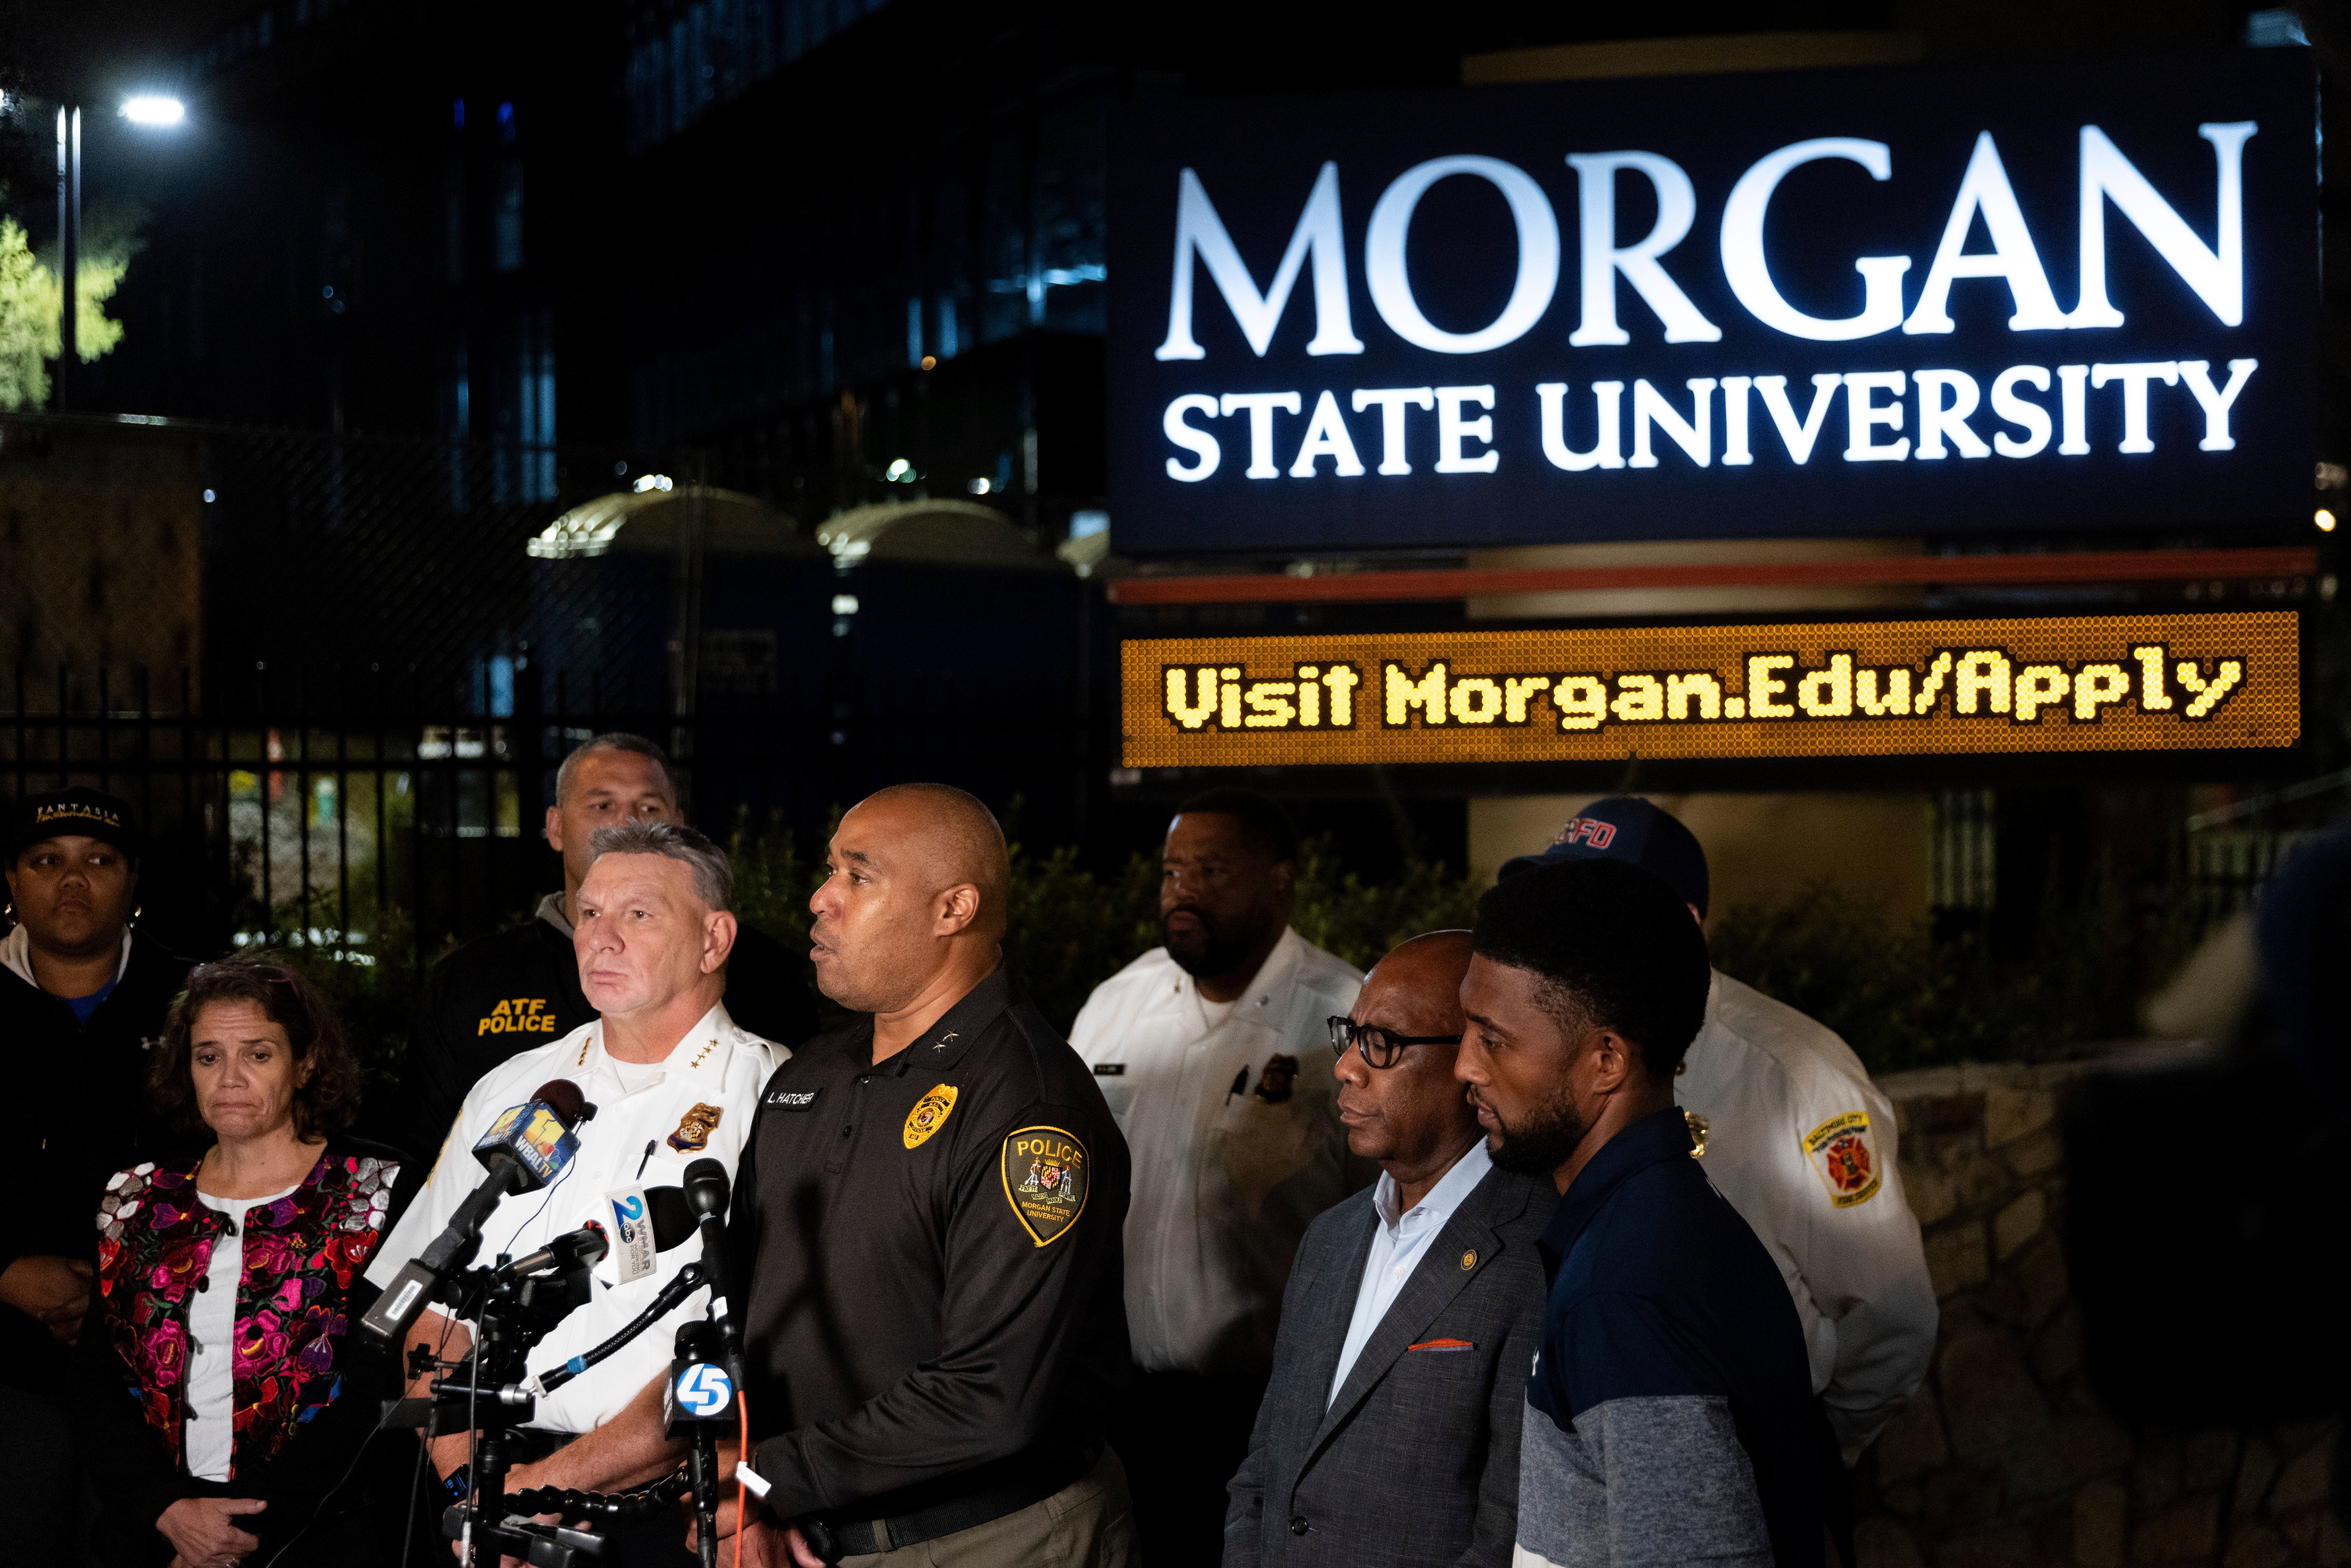 Morgan State University Police Chief Lance Hatcher speaks at a news conference after the shooting